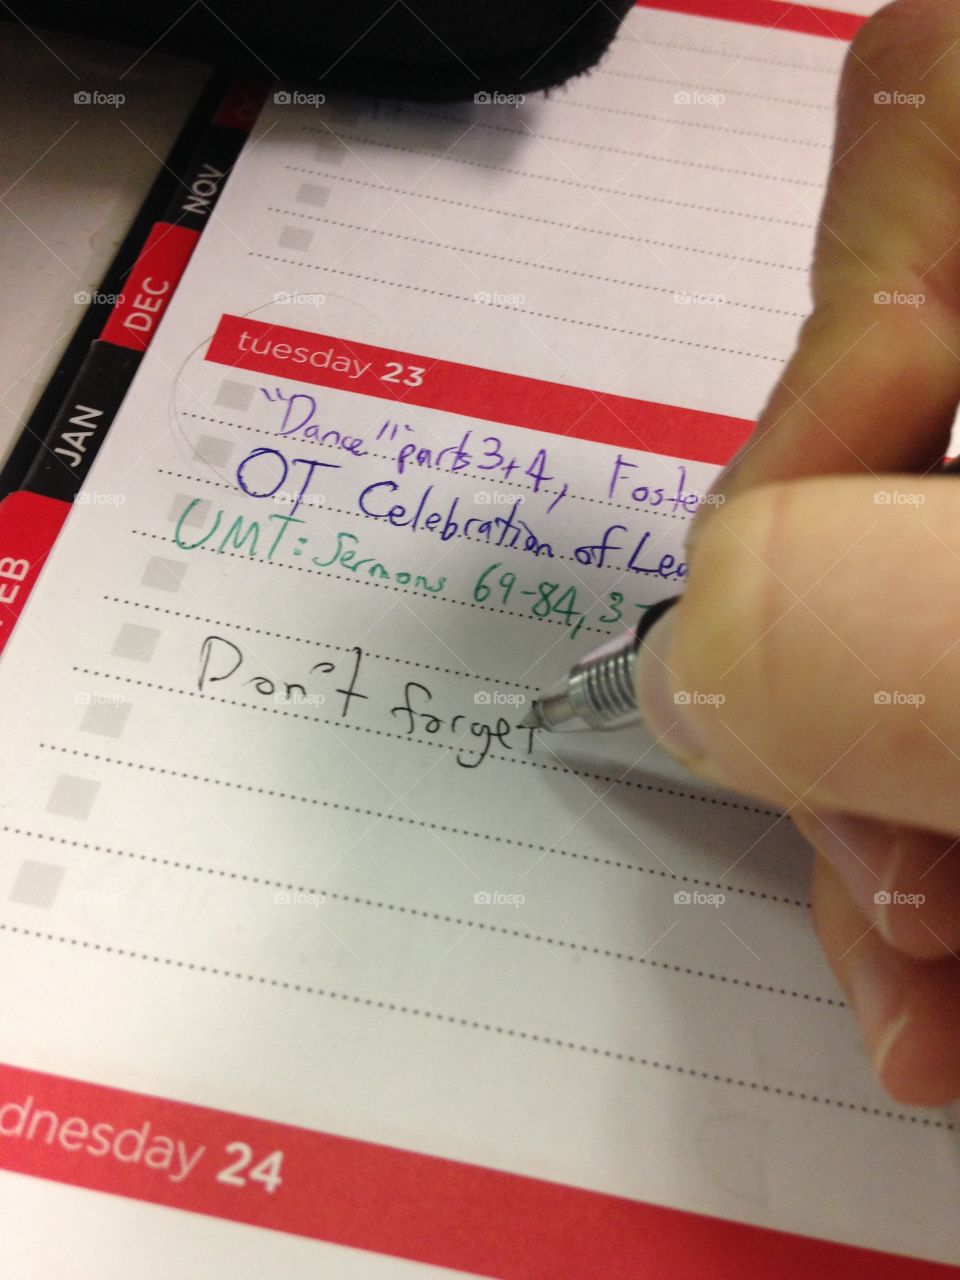 Schedule planner note writing "don't forget" (right-handed)